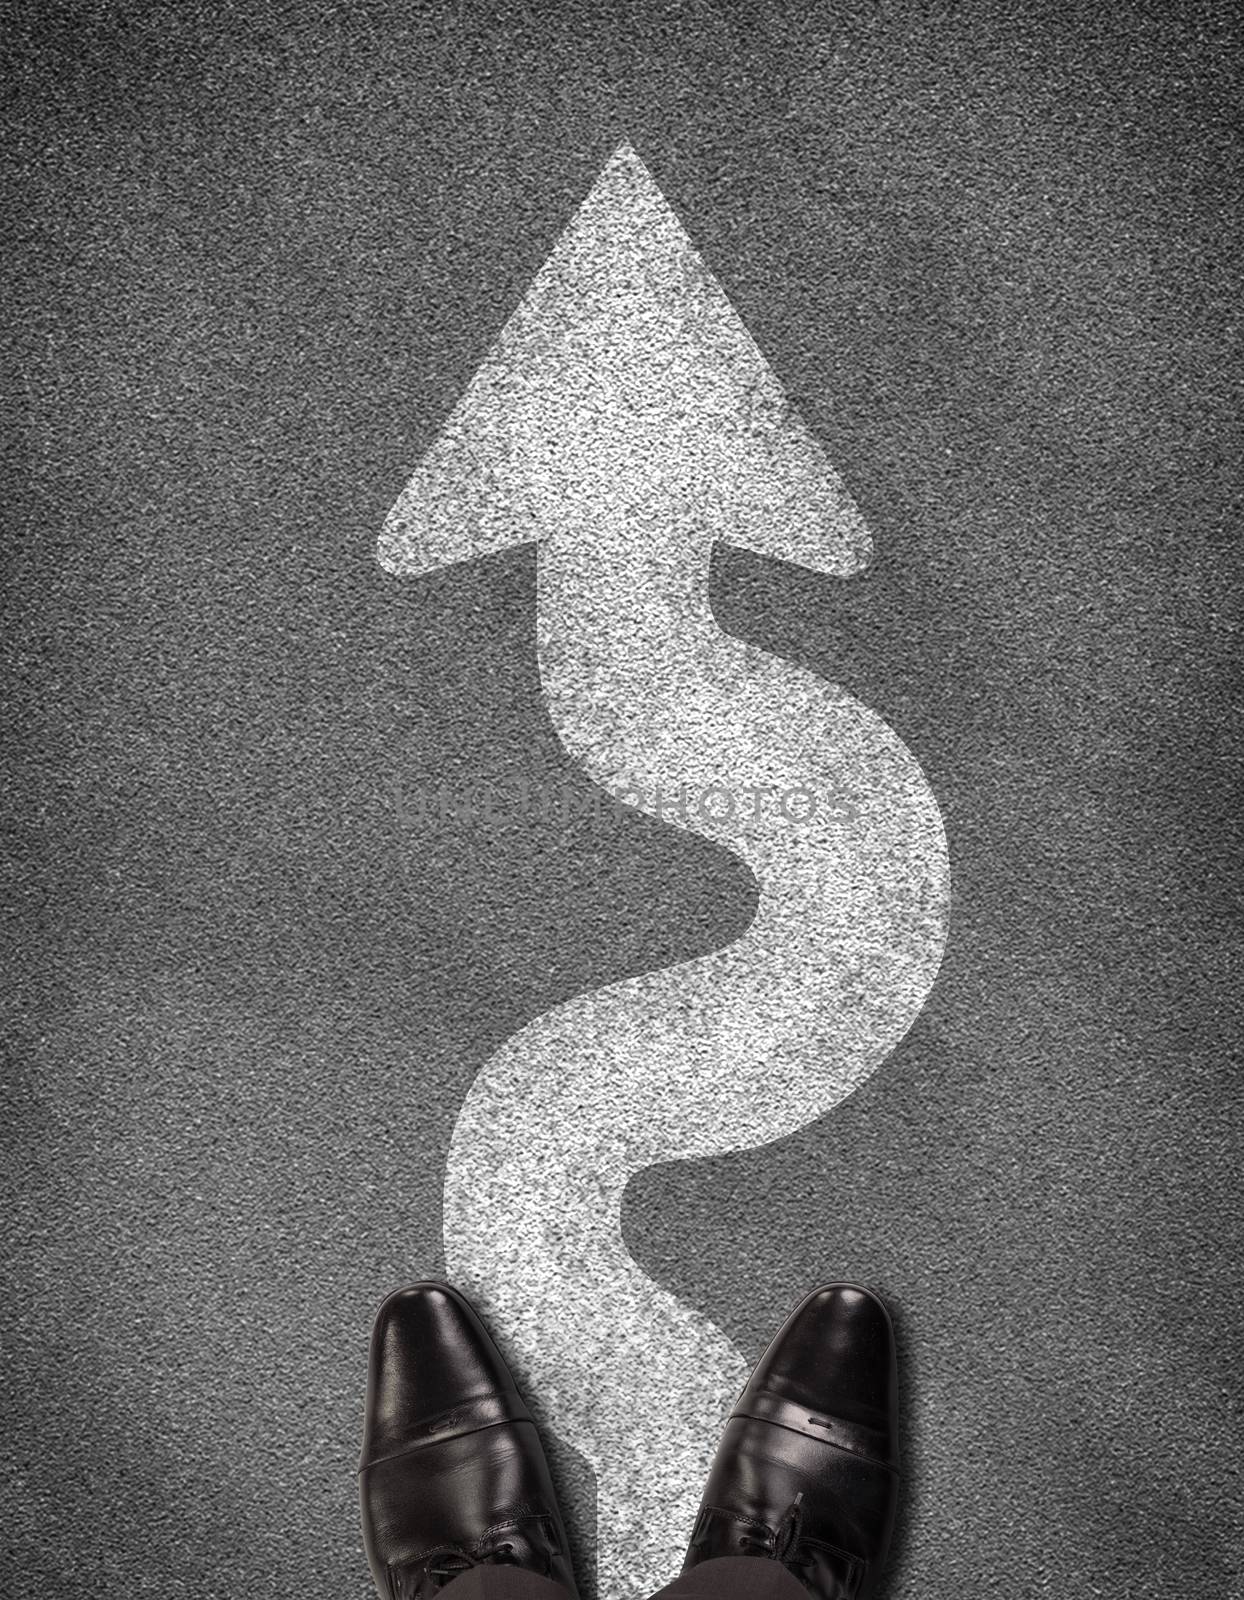 Top view of shoes standing on asphalt road with winding arrow. Business concept